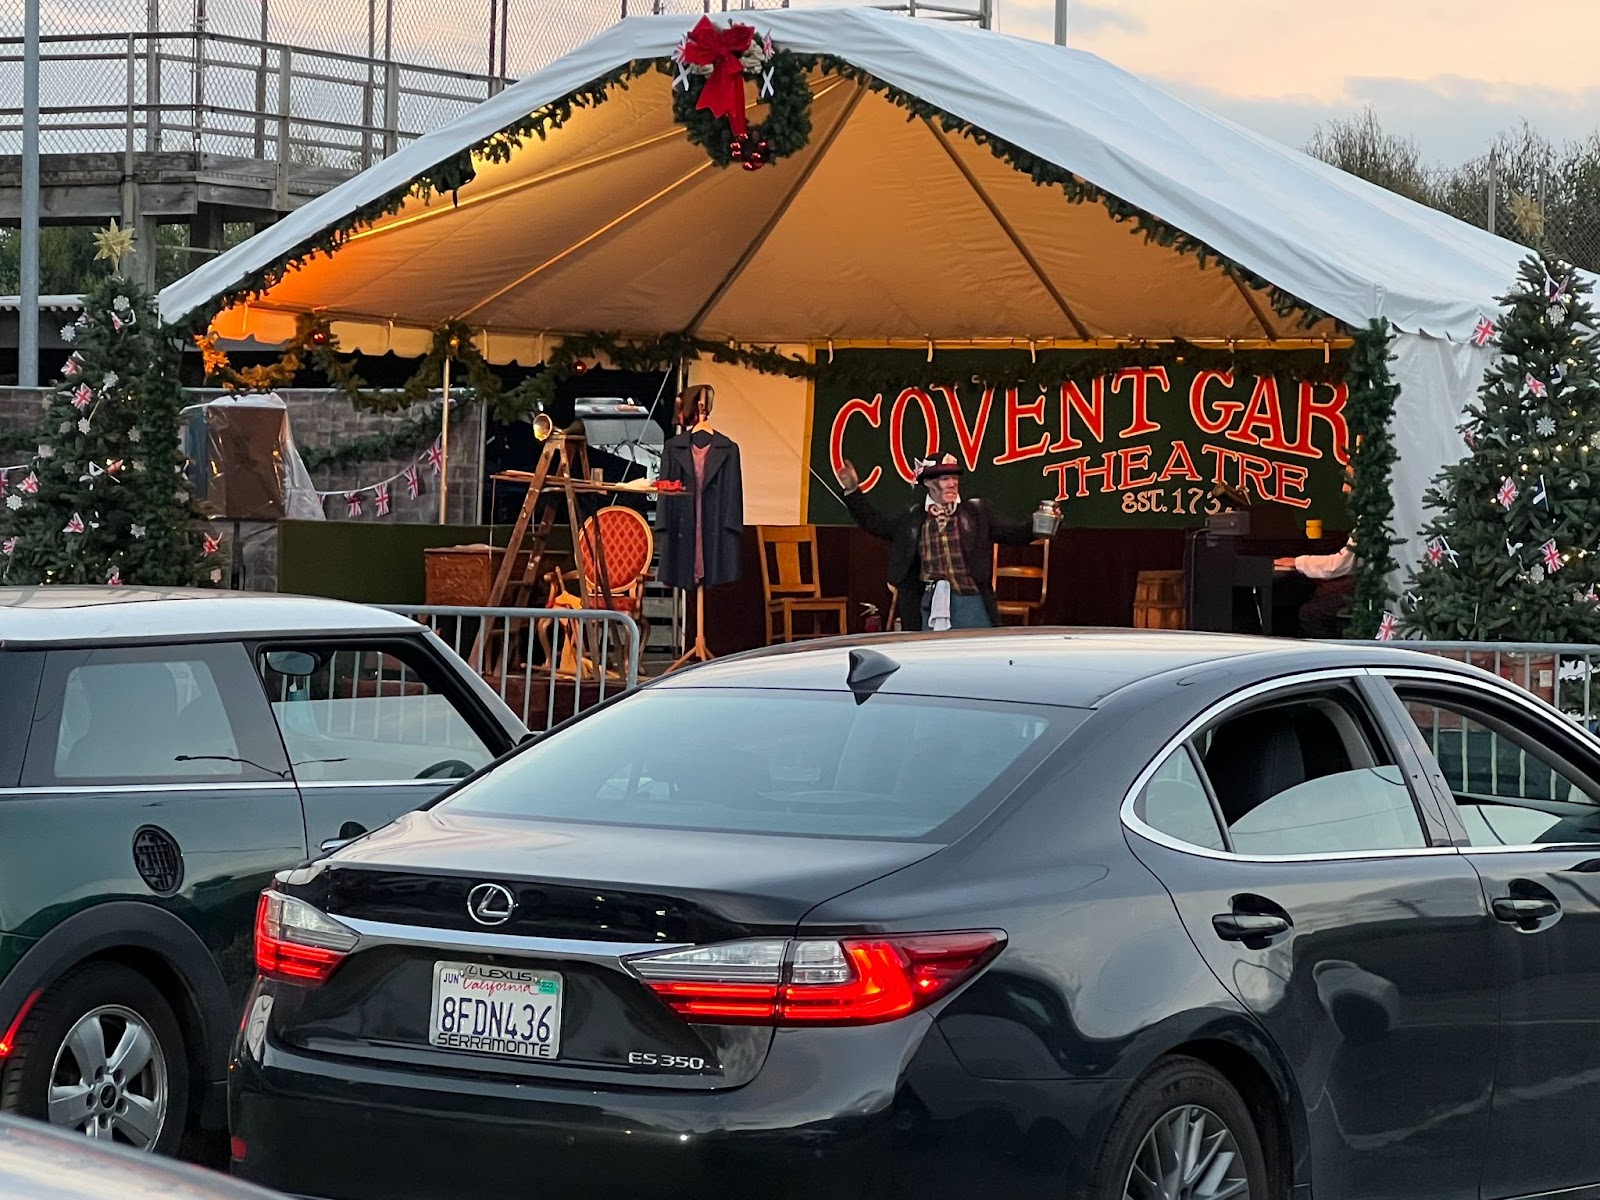 Cars are parked in front of a stage that displays part of a sign indicating "Covent Garden Theater."